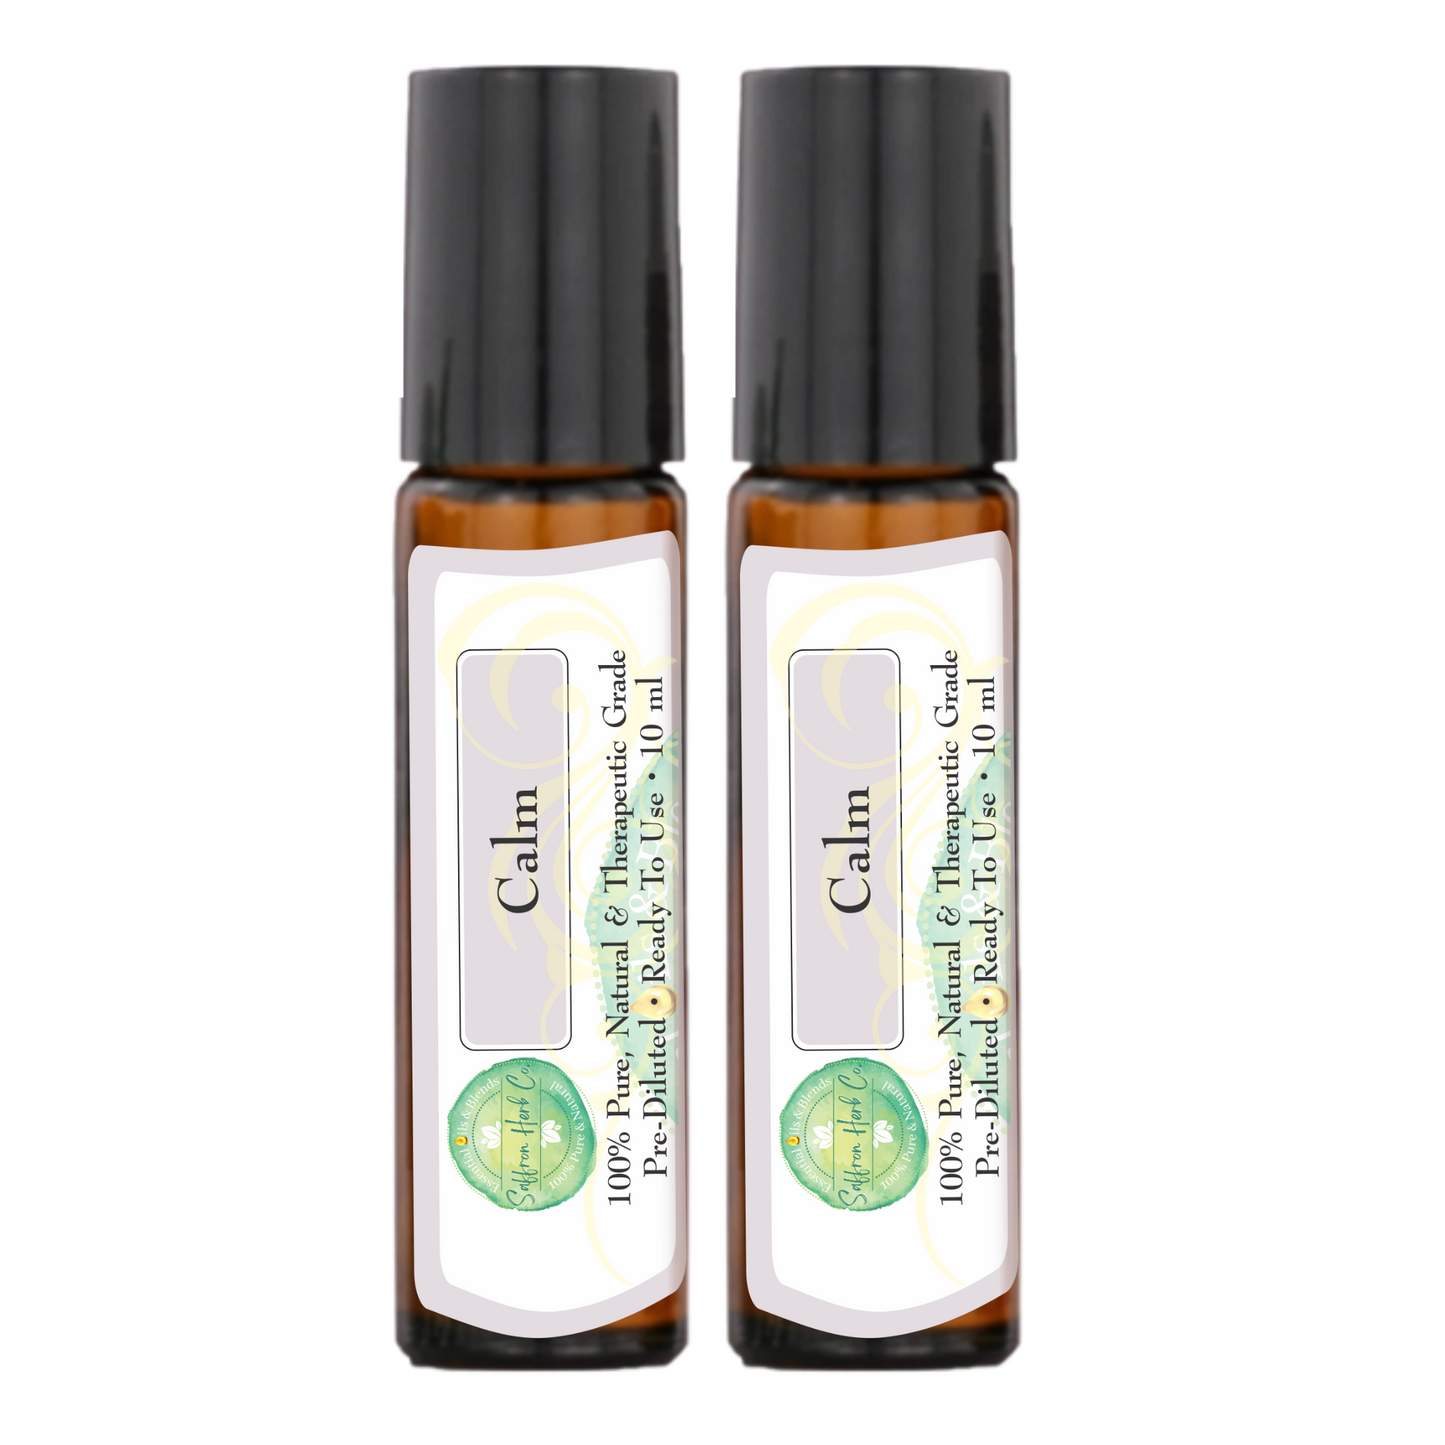 Calm™ Essential Oil Roller Bottle Blend • 100% Pure & Natural • Pre-Diluted • Ready To Use